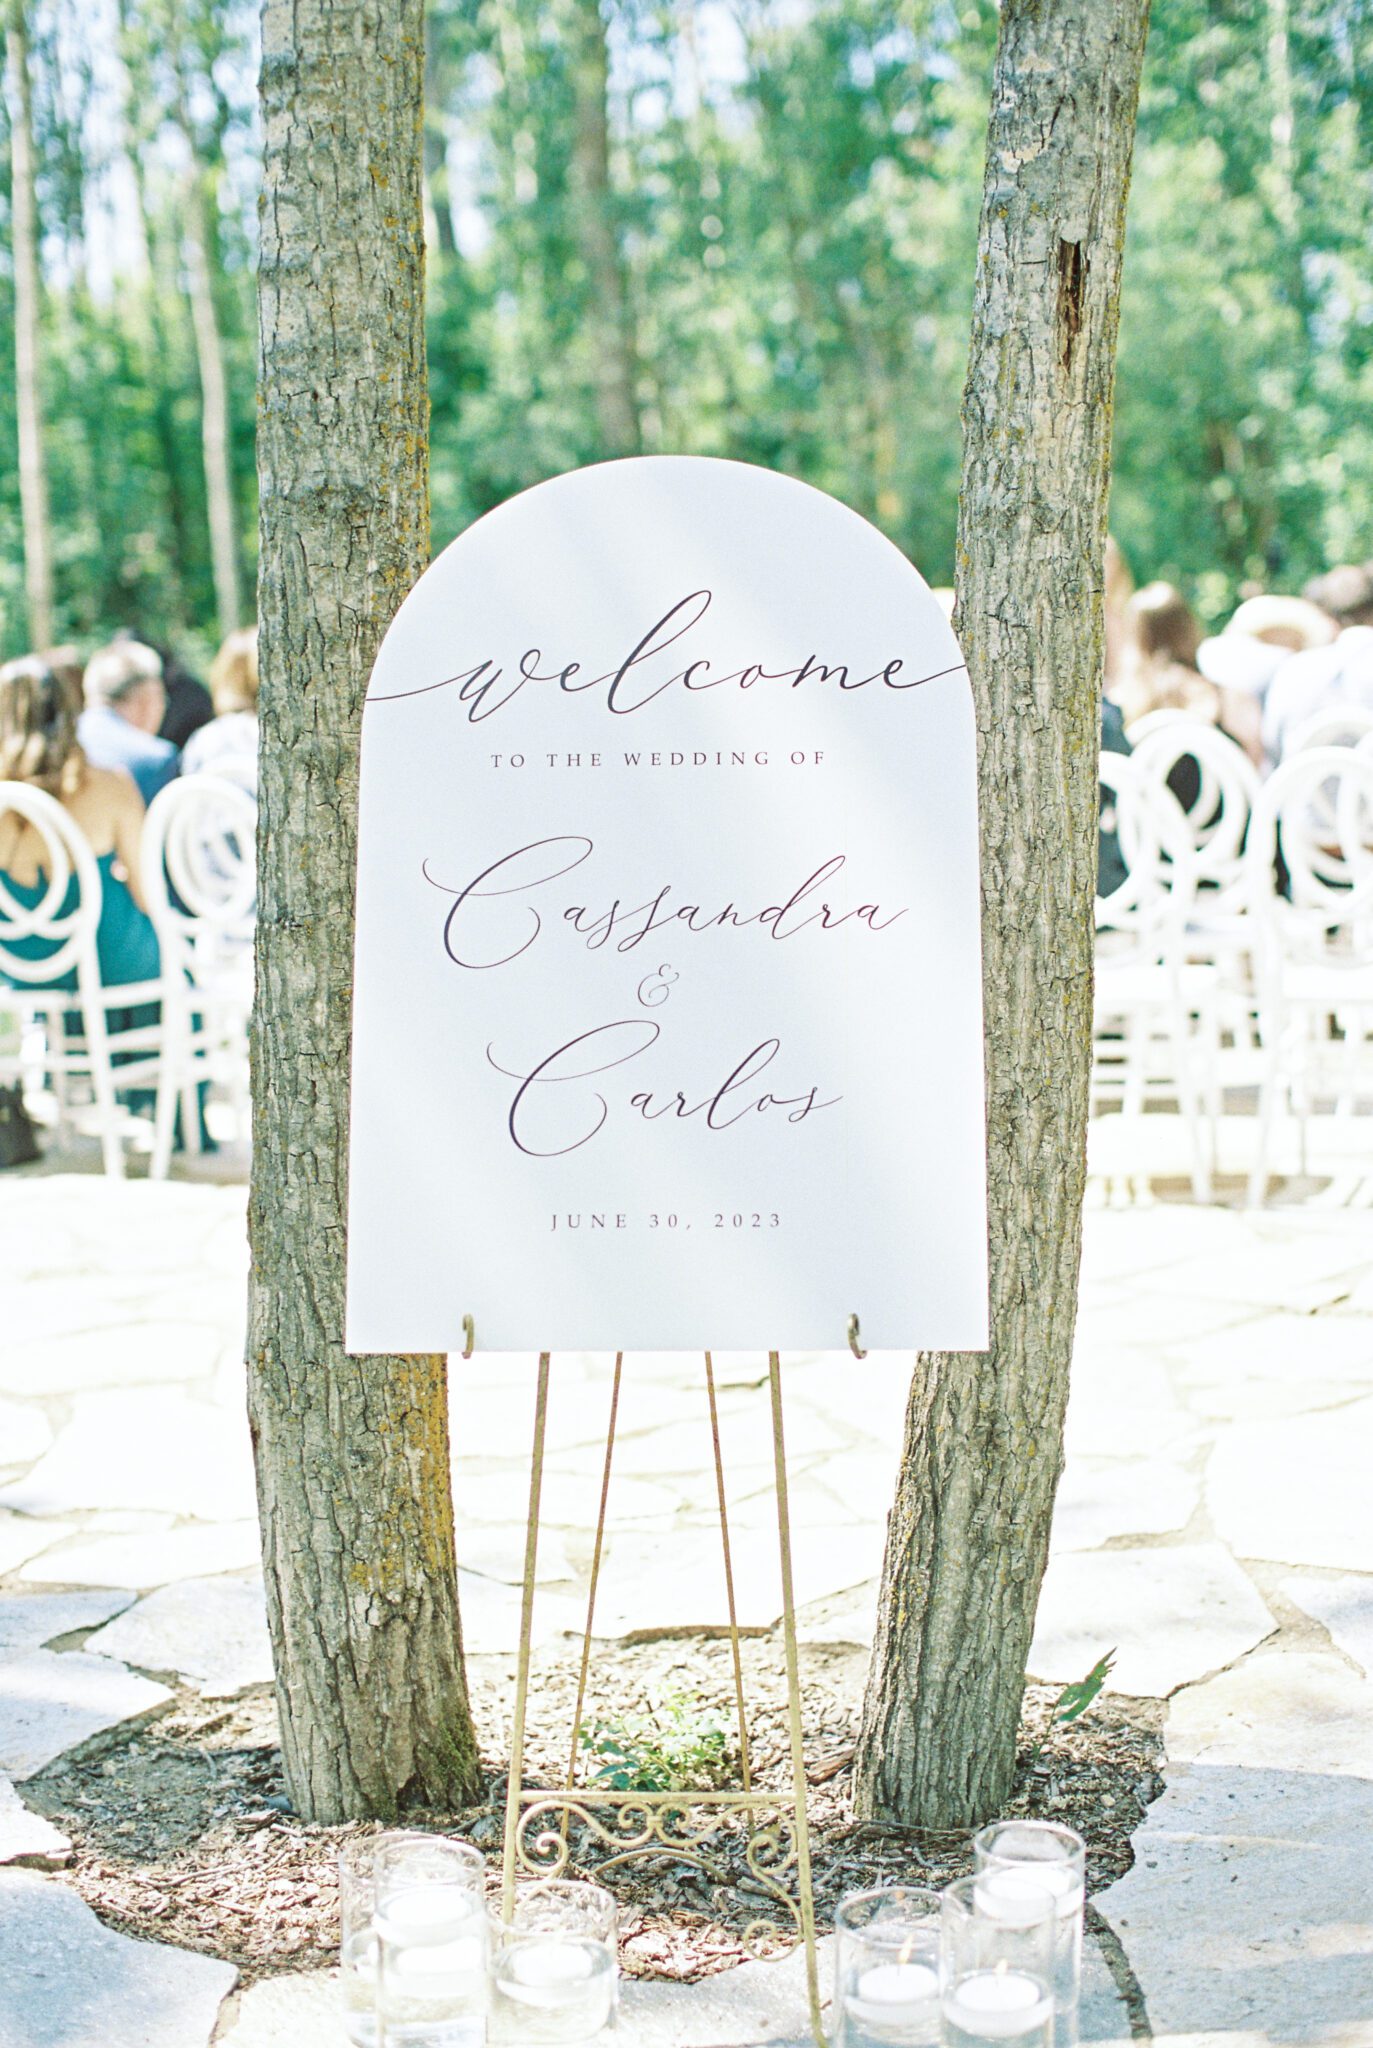 Elegant welcome sign, wedding ceremony at Sparrow Lane Events in Alberta. Classic colour palette of white, blush, and green wedding inspiration. 